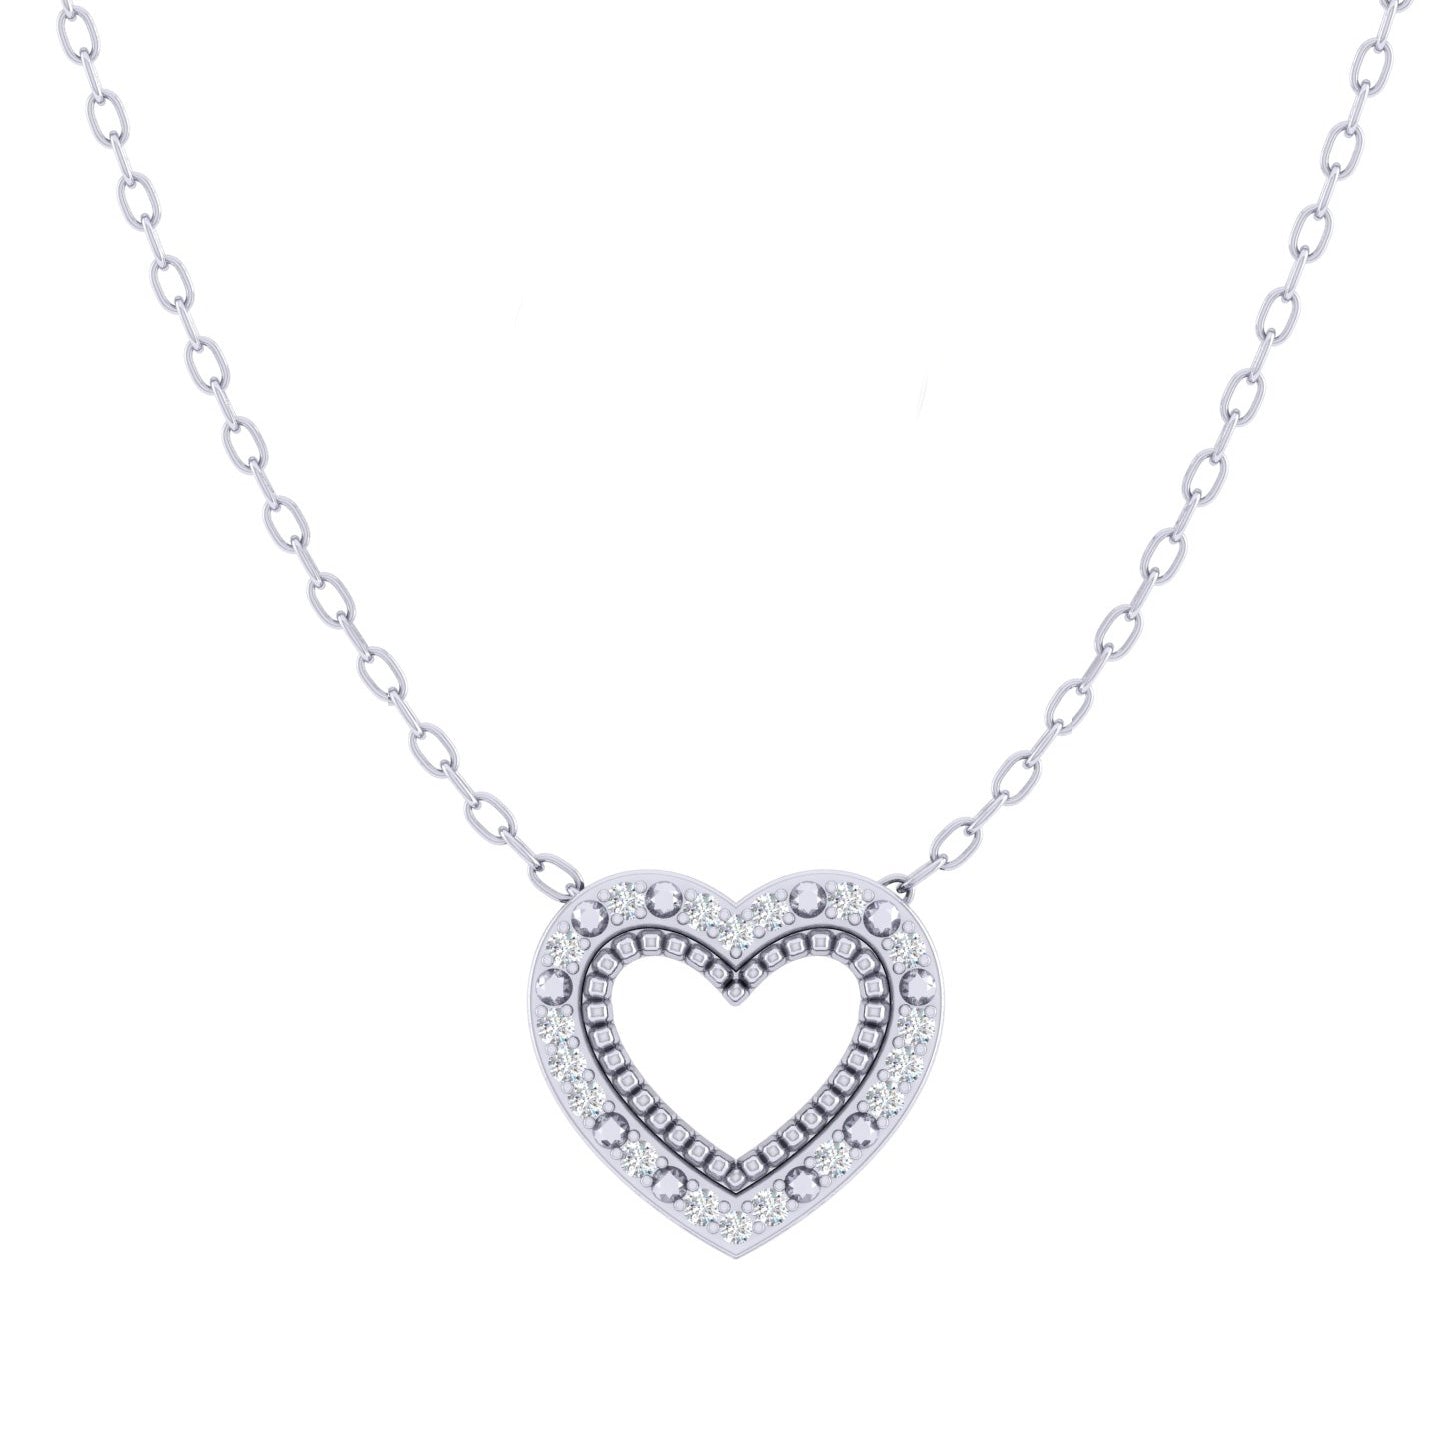 Heart 1/20 Cttw Natural Diamond Pendant Necklace set in 925 Sterling Silver